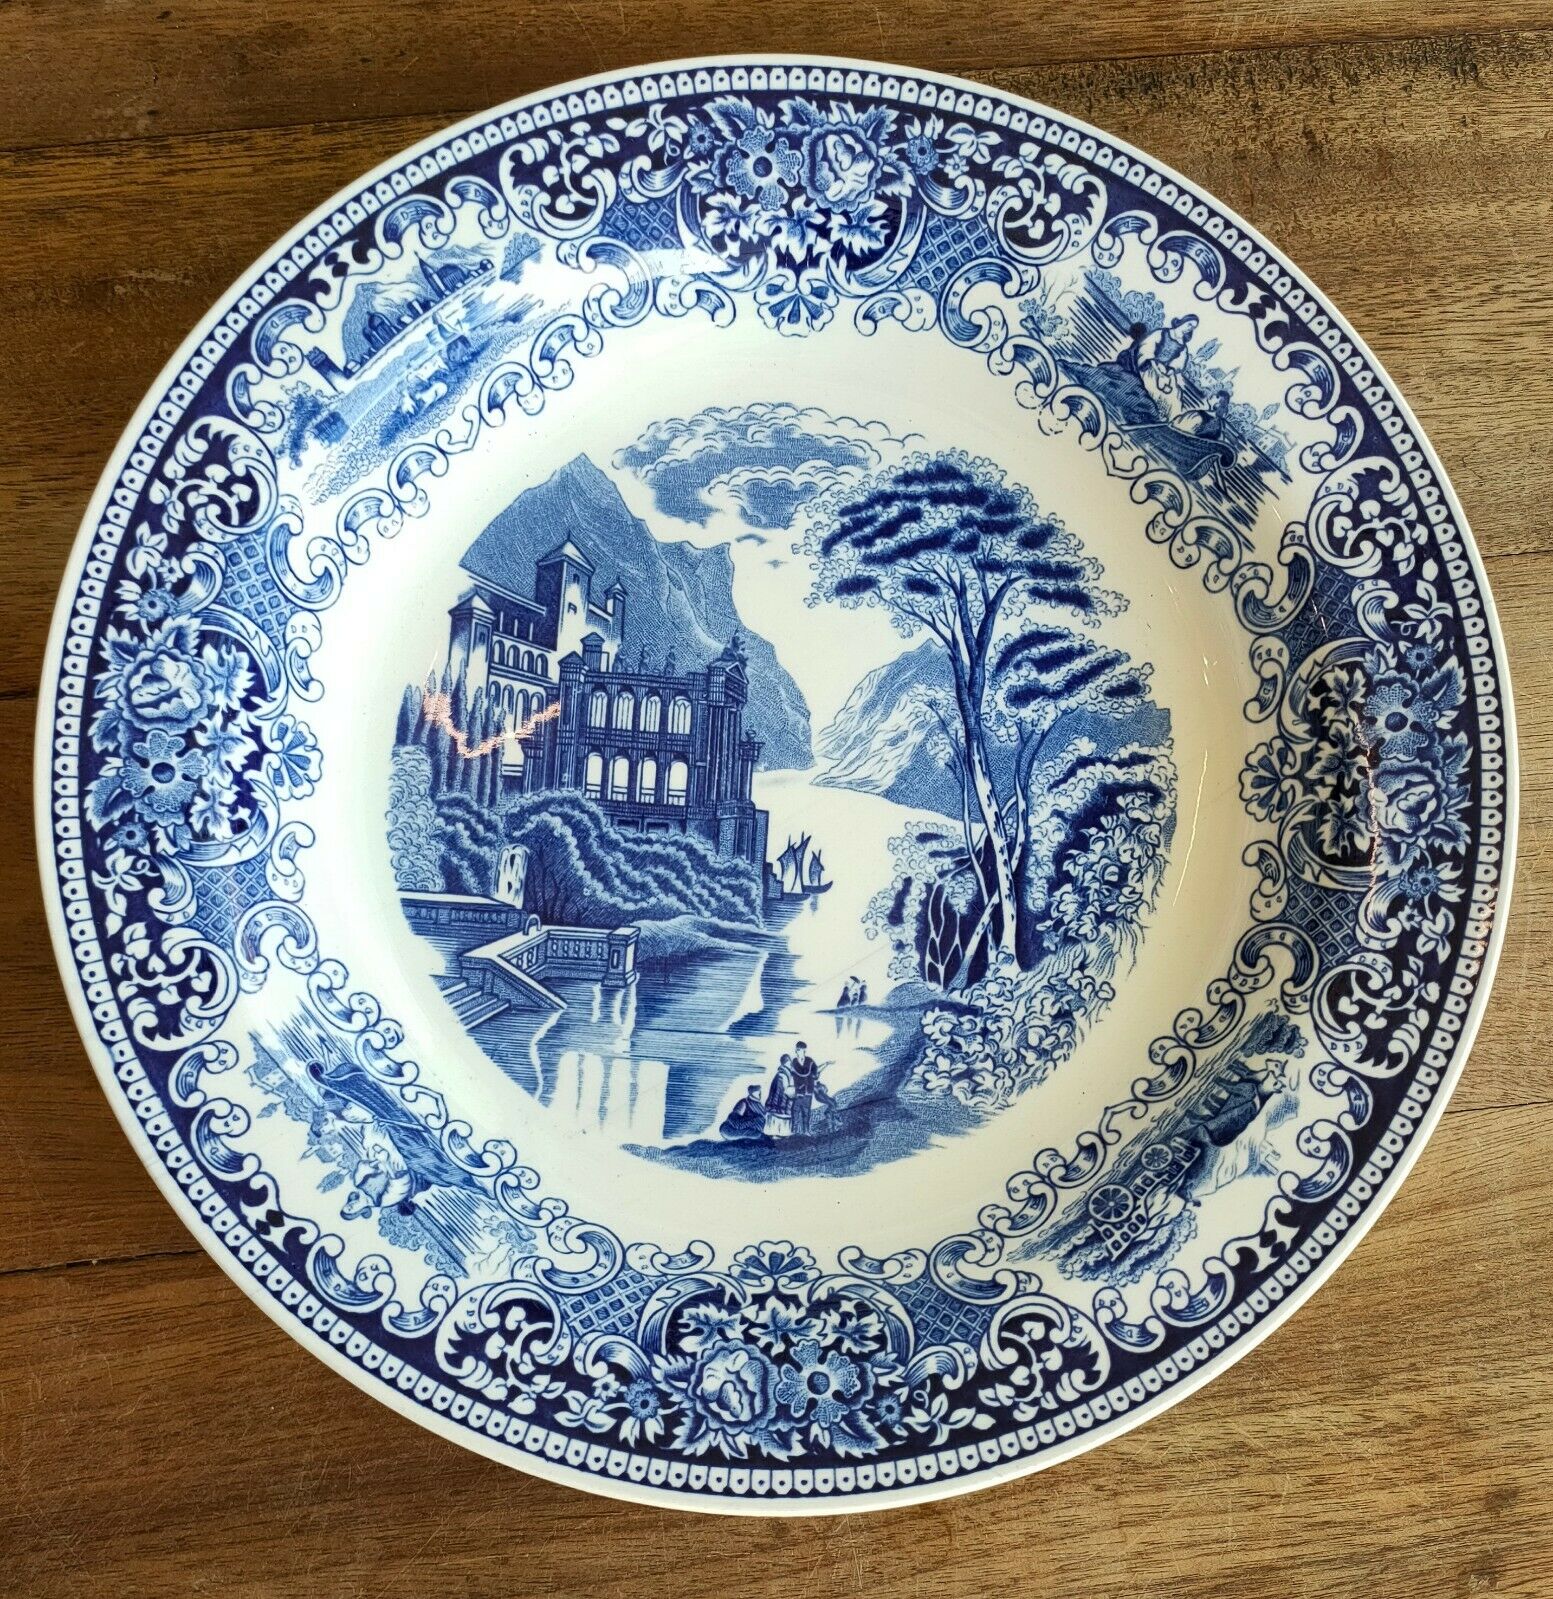 Featured image for “Plat Royal Sphinx Maastricht / Petrus Regout / Made In Holland”